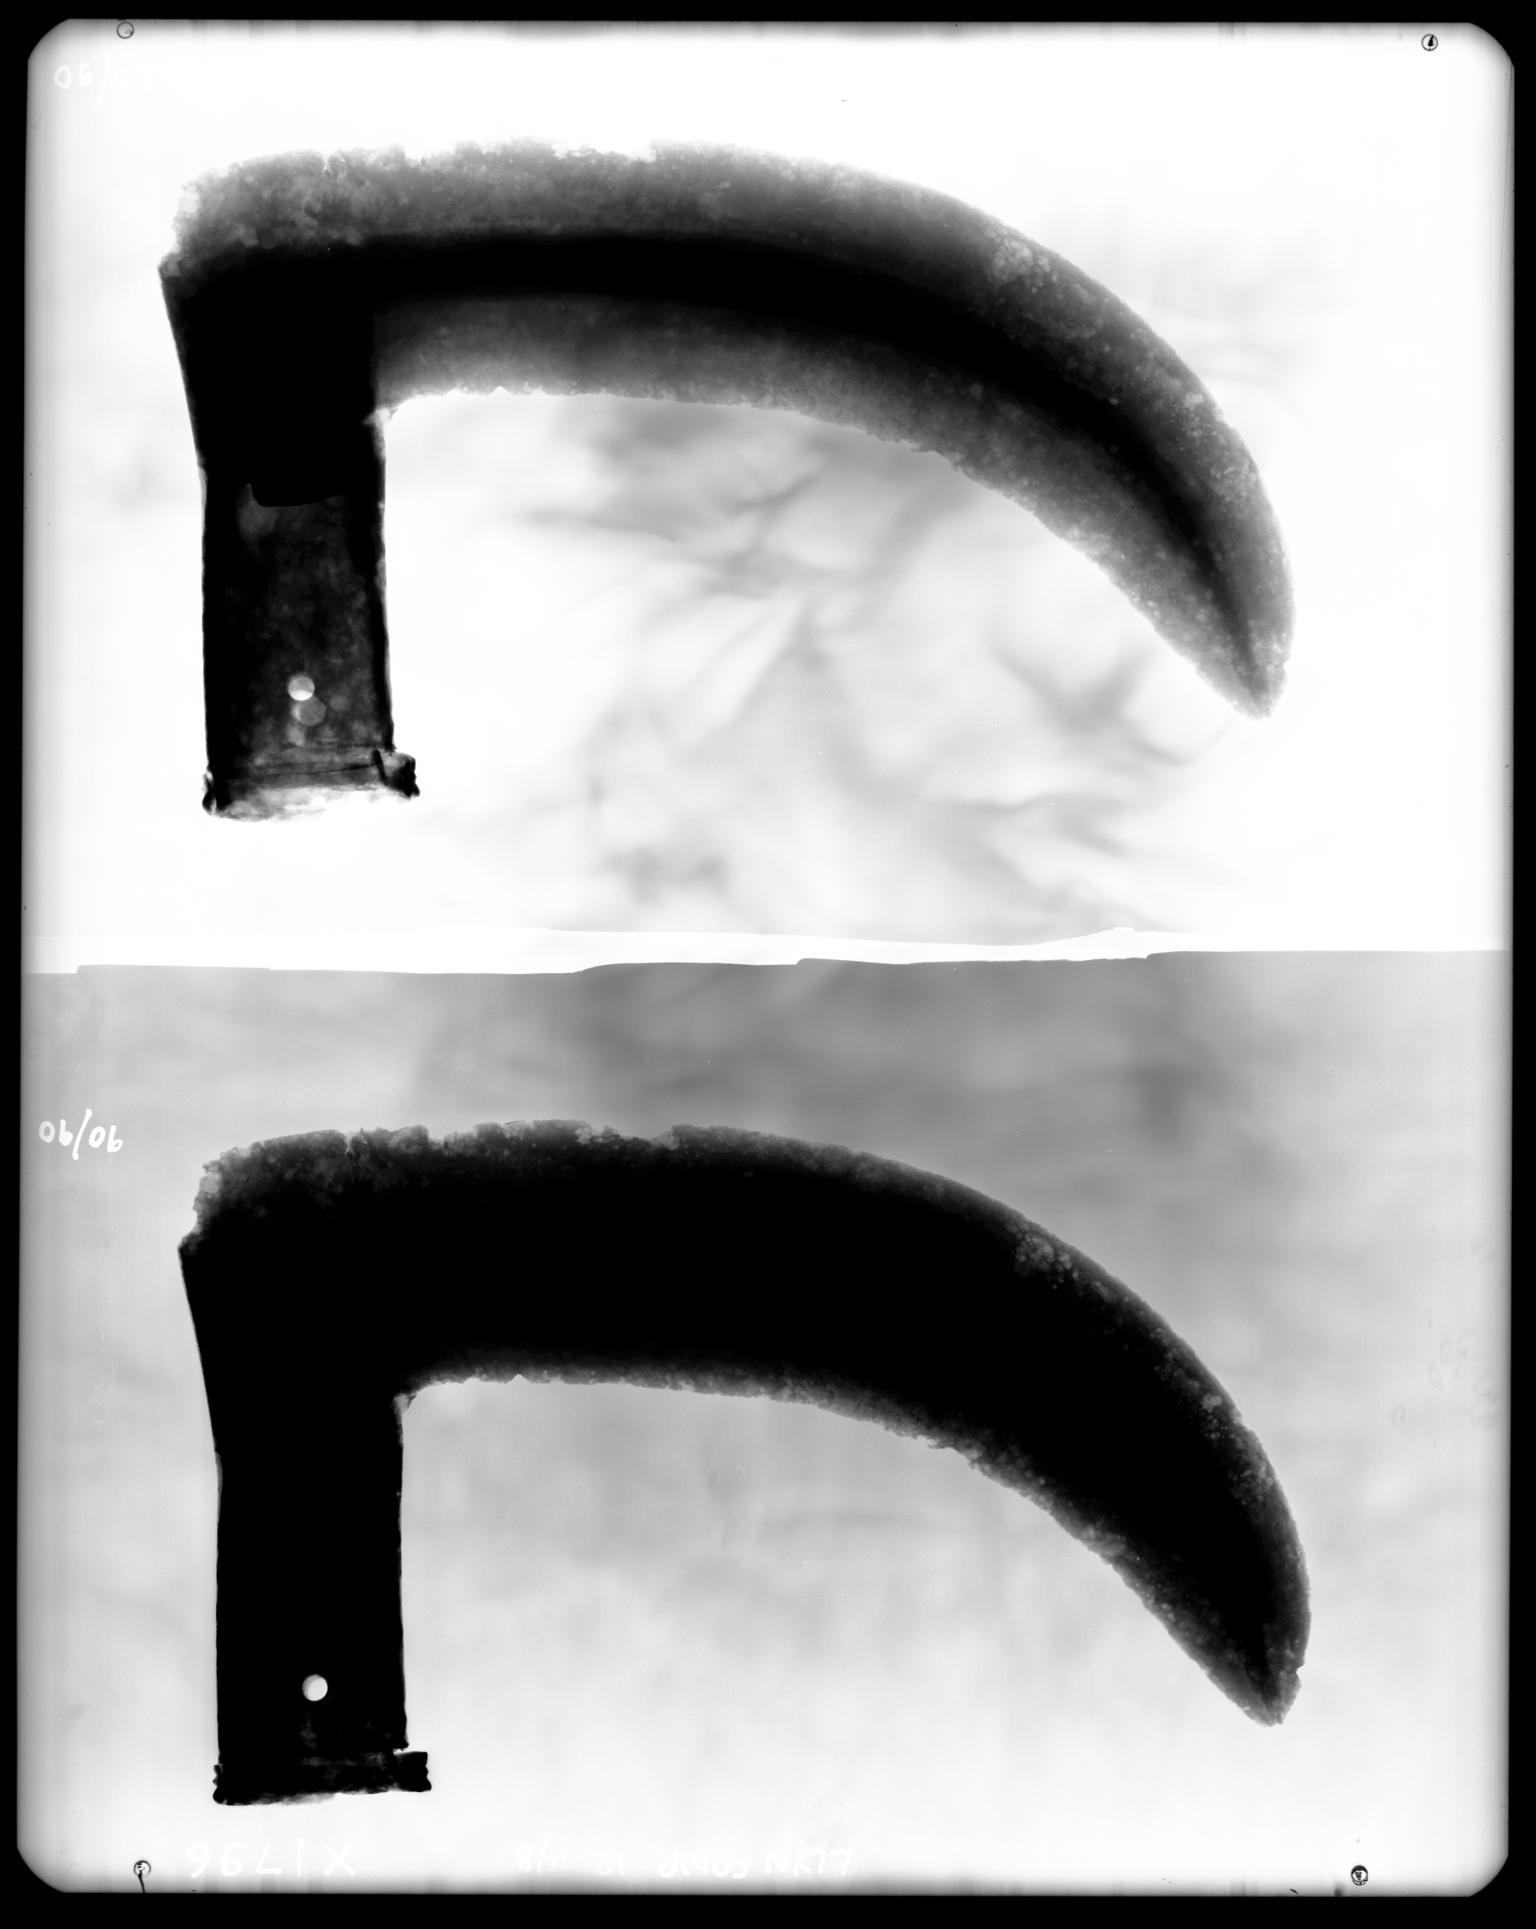 Late Bronze Age / Early Iron Age iron sickle